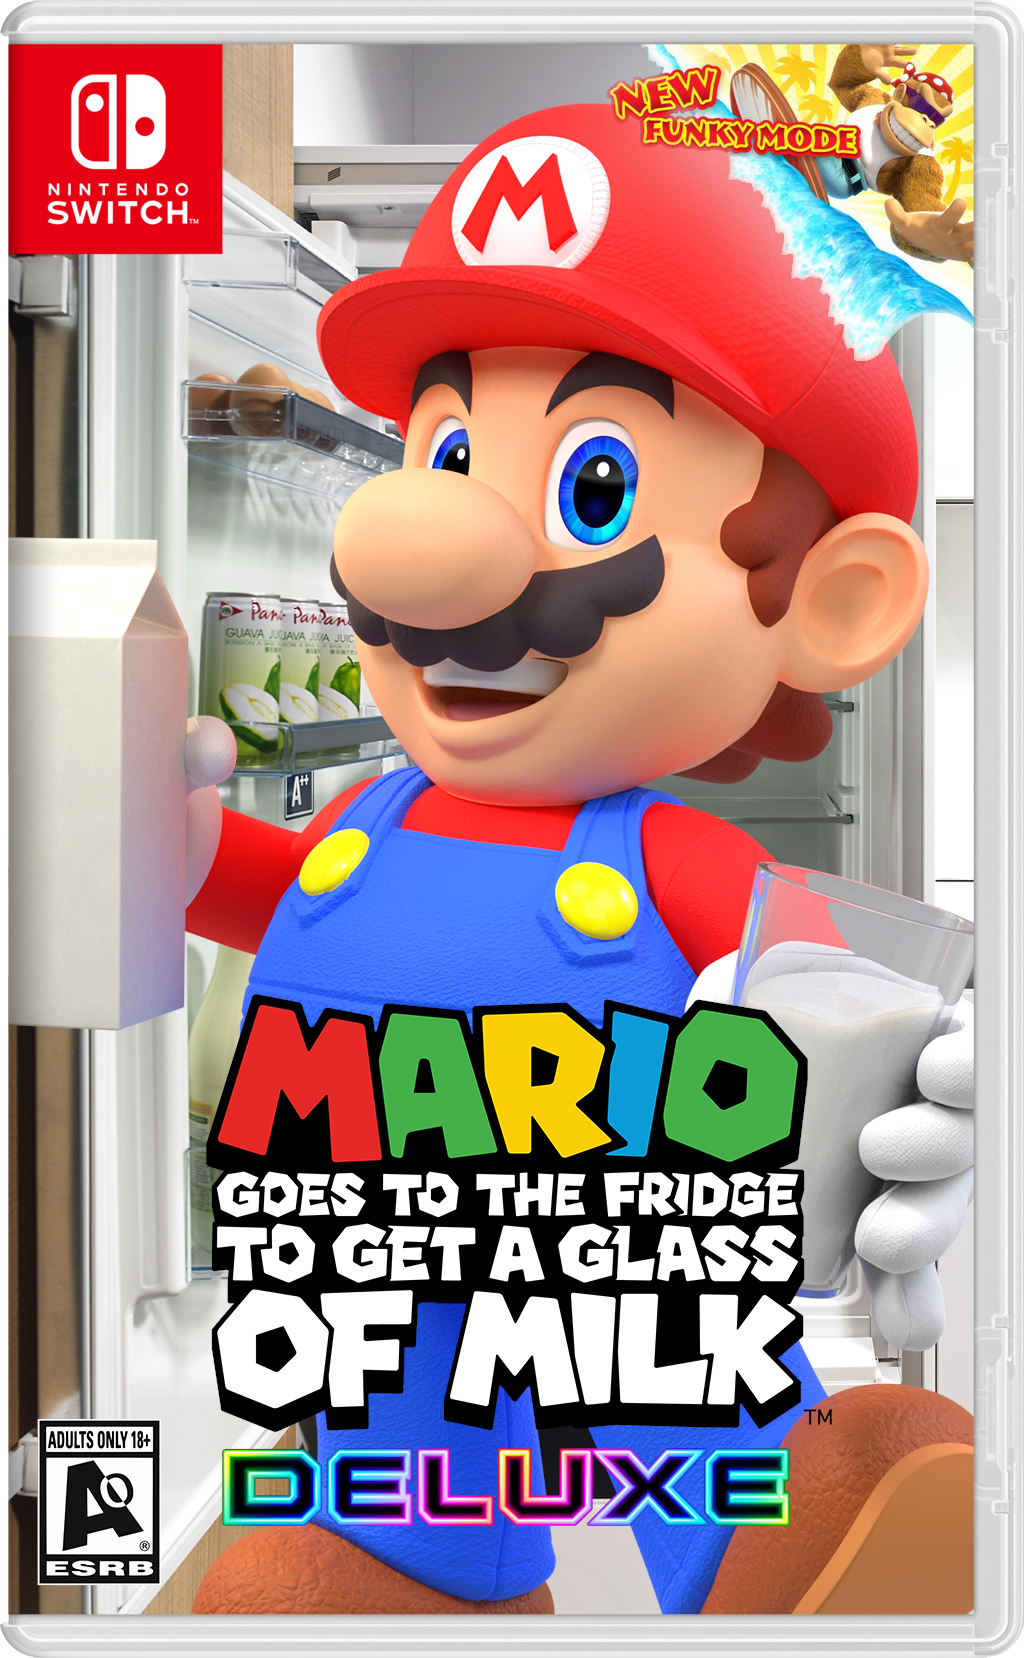 Mario Goes to Fridge to Get a Glass of Milk Deluxe